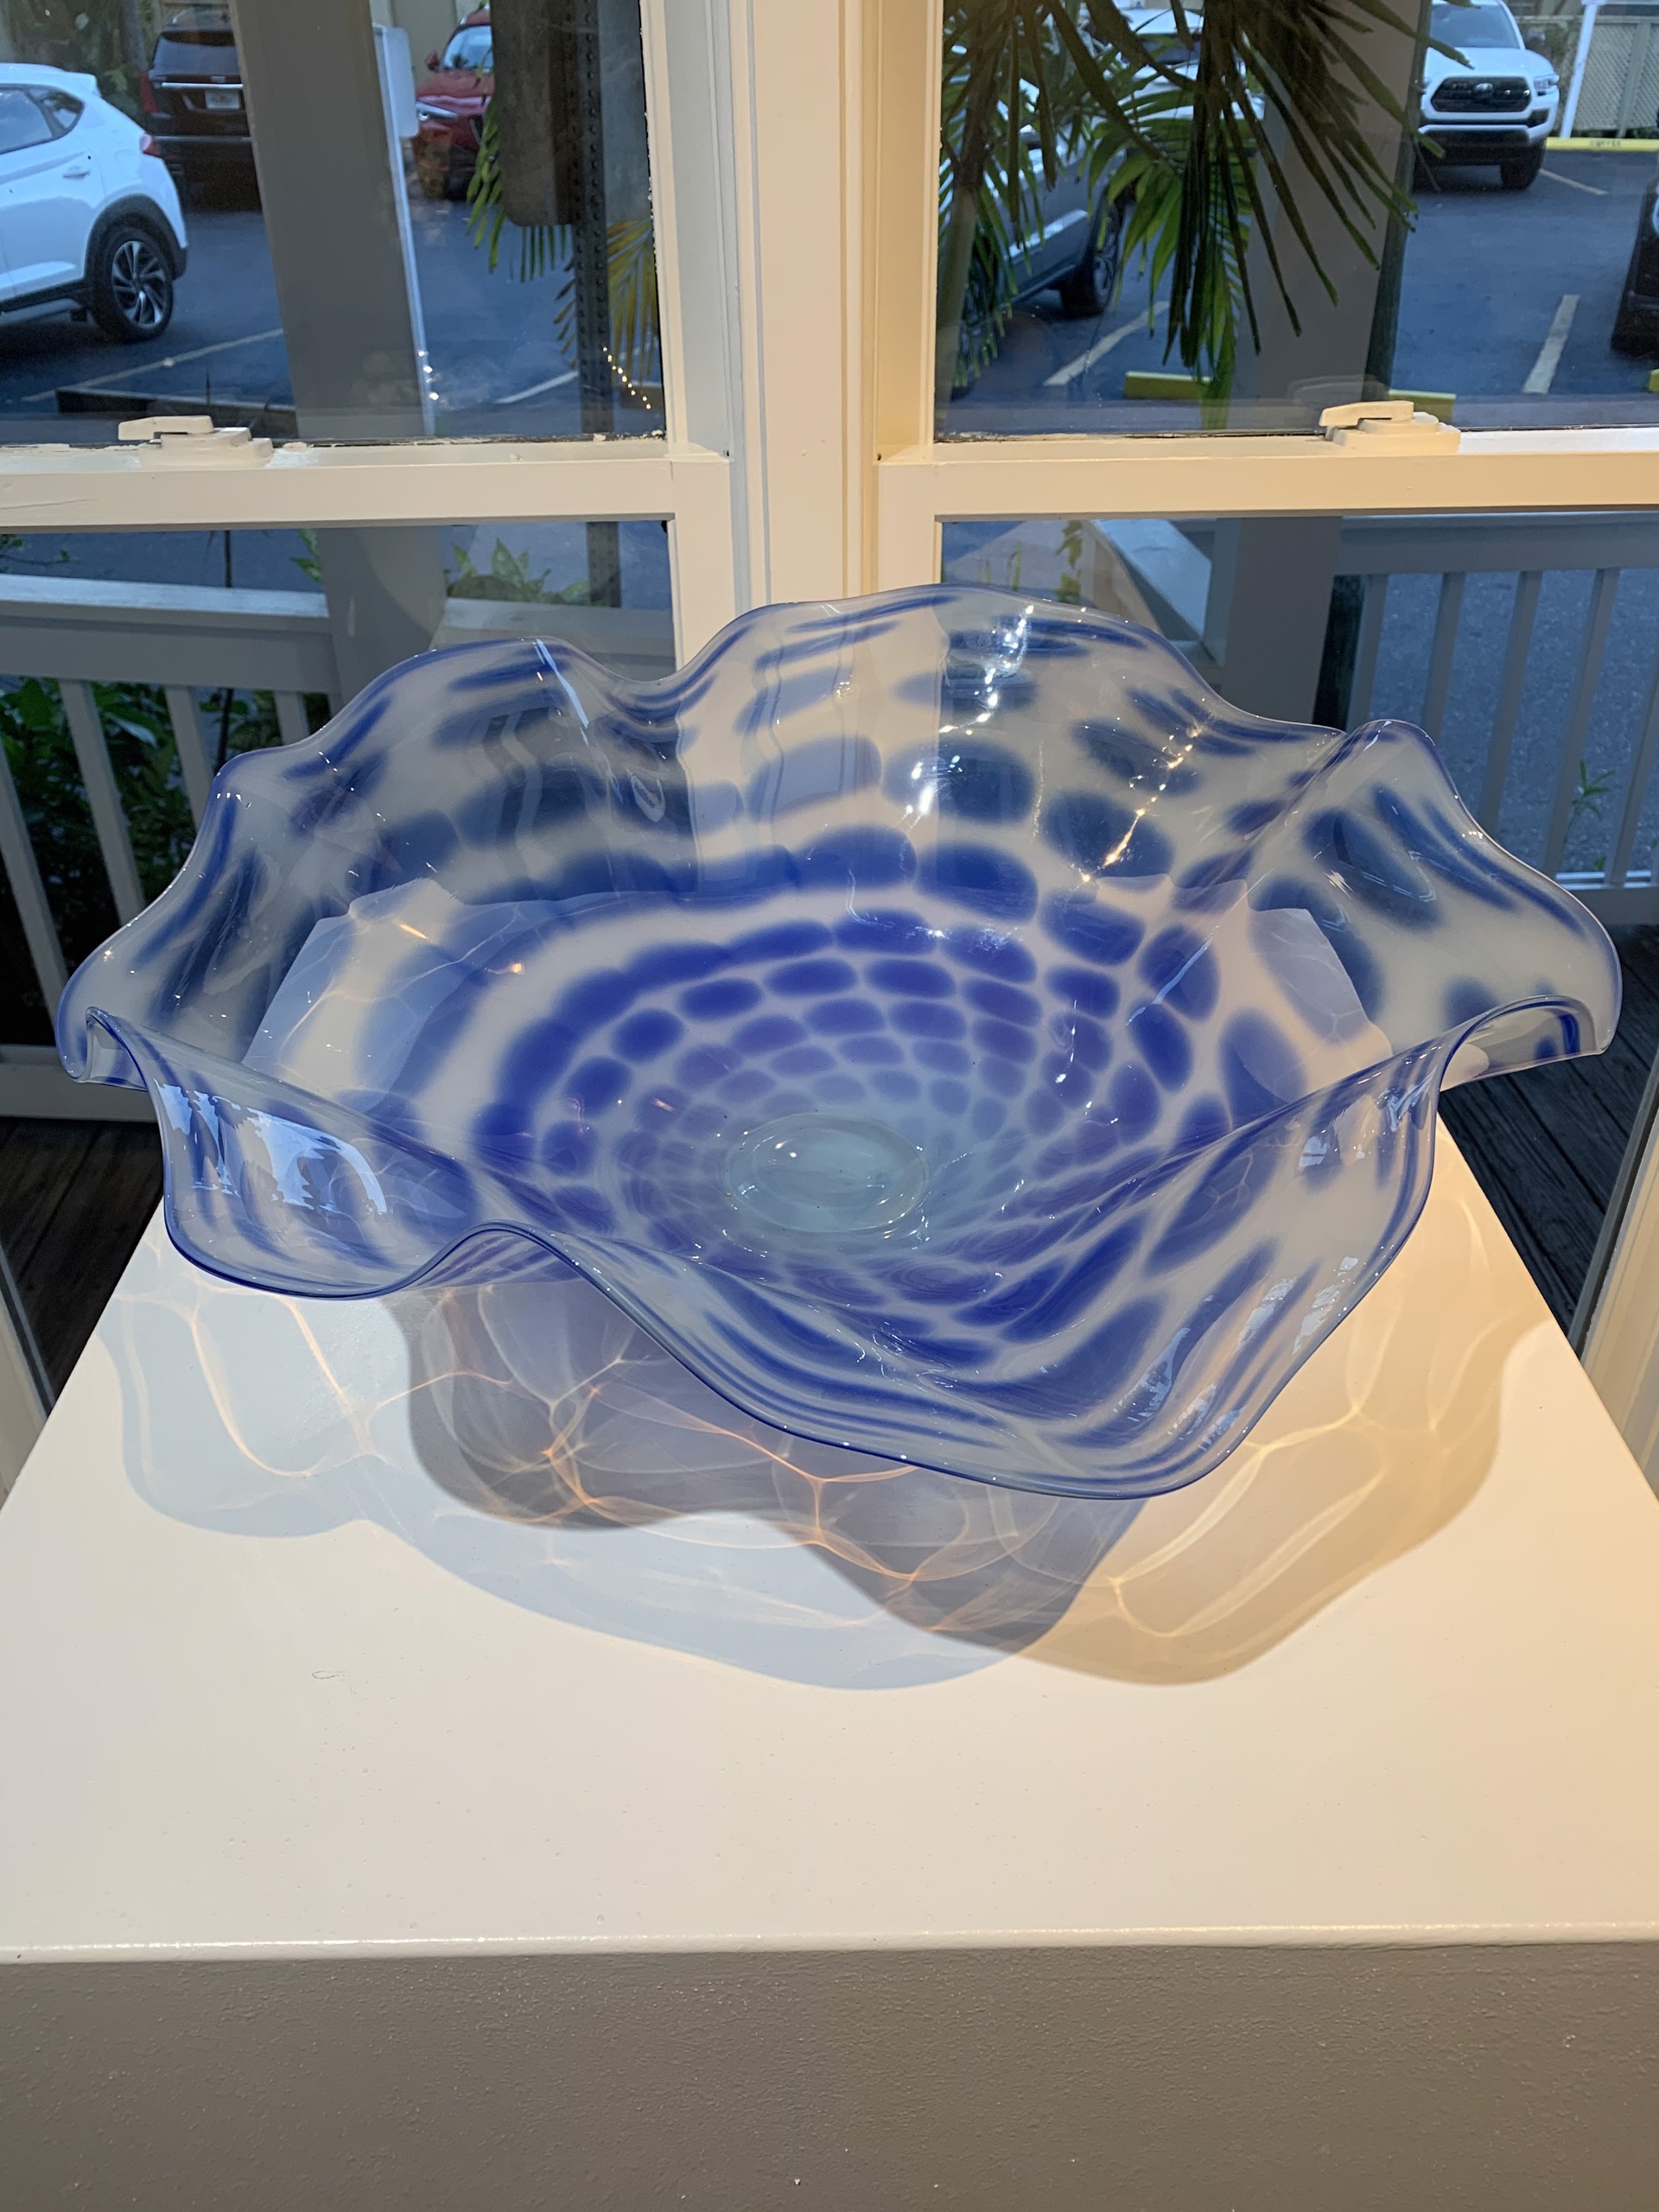 Royal Blue & White Spotted Bowl by T. Miller